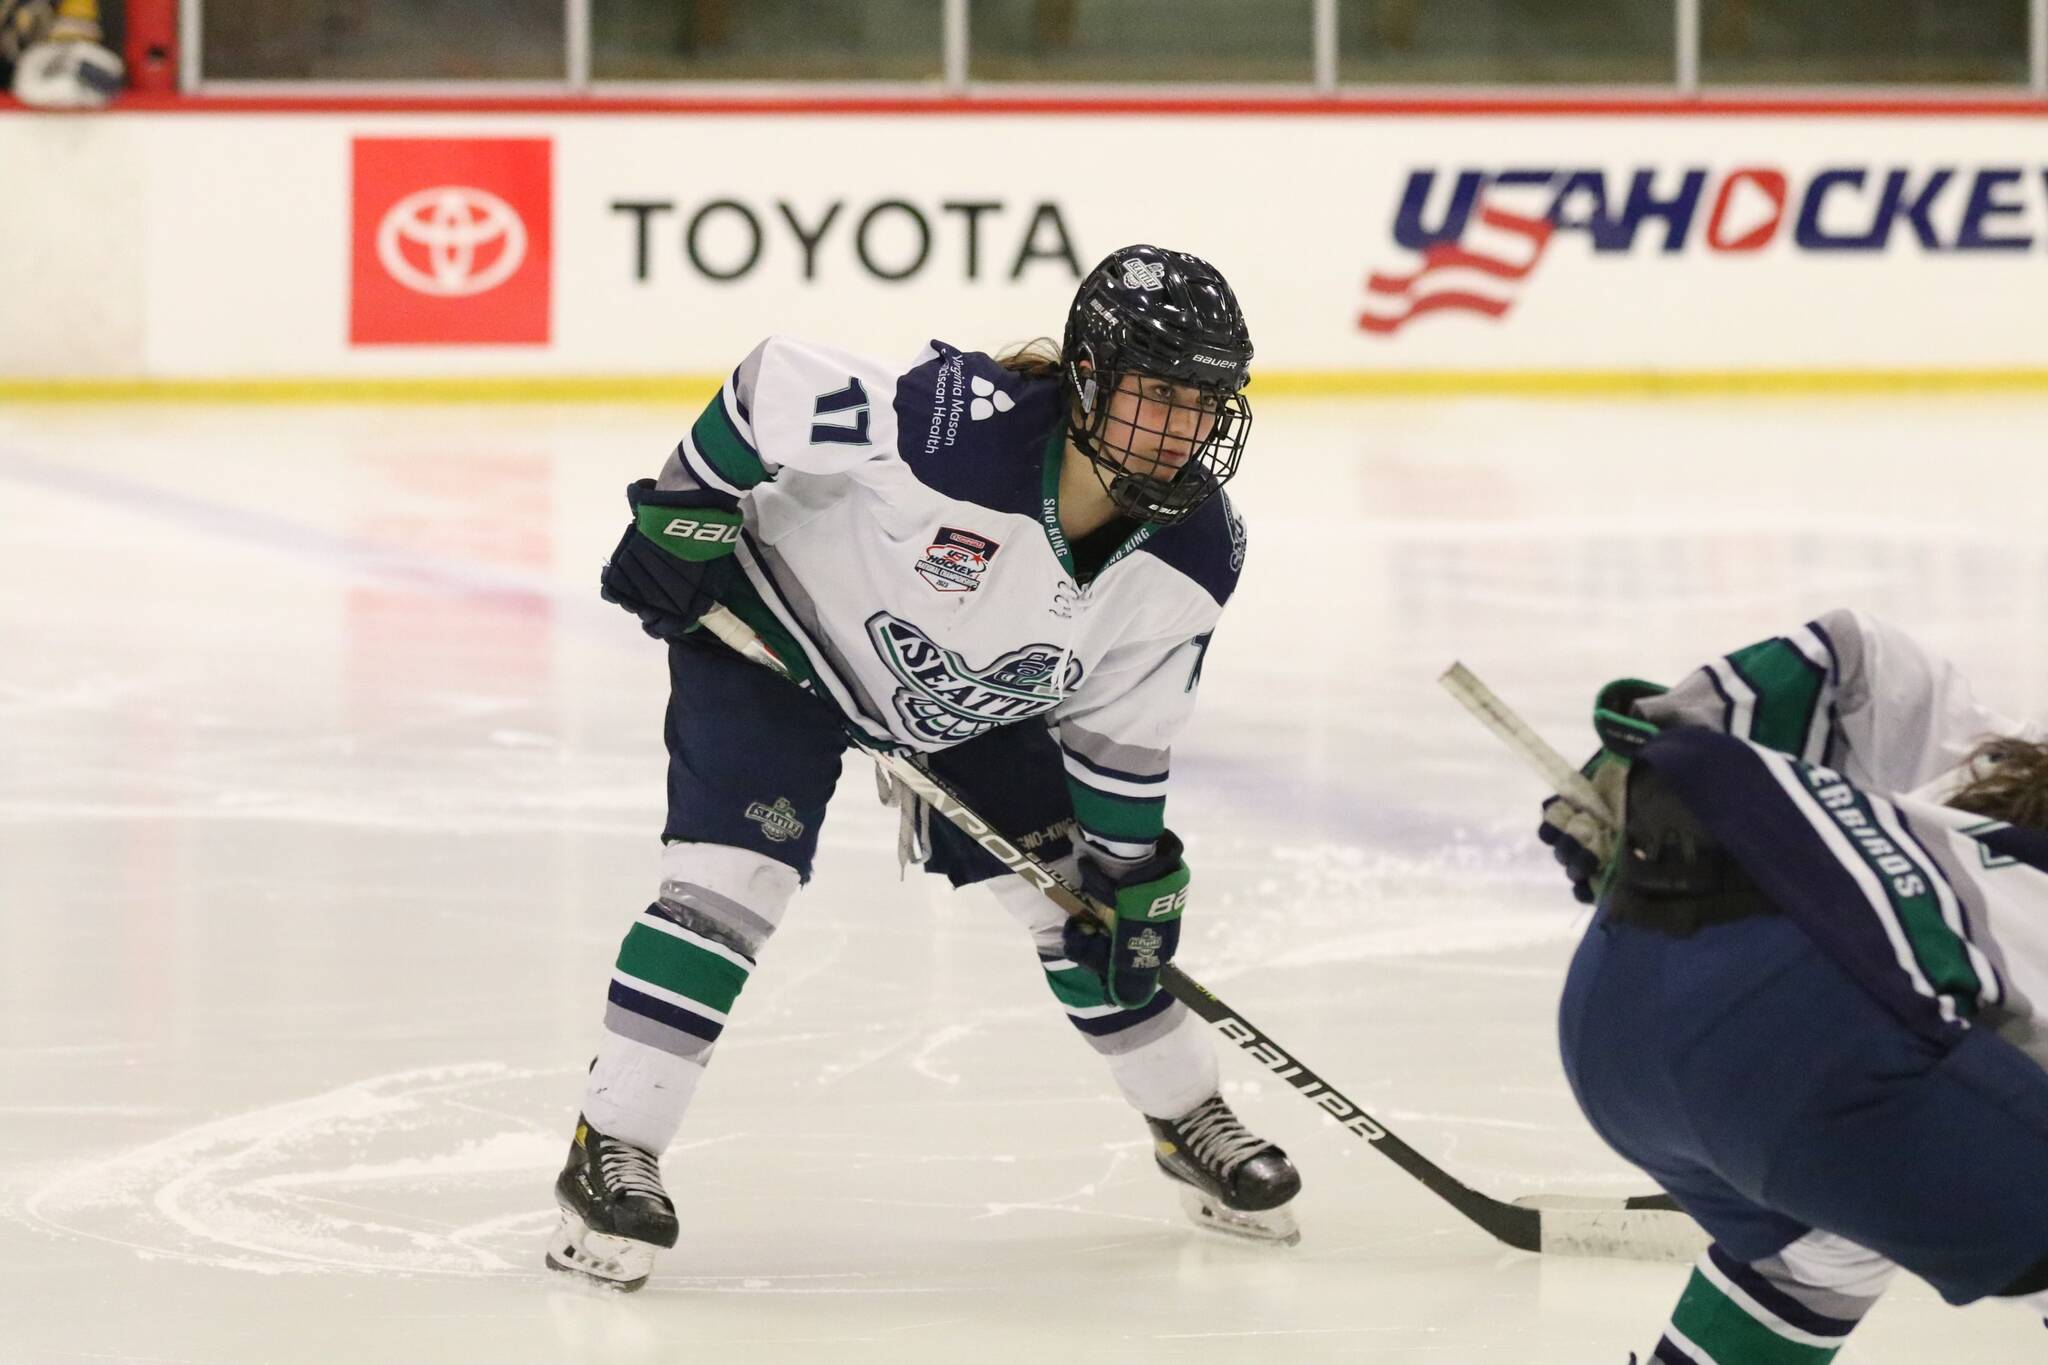 Thunderbird hockey players to appear at Kent, Renton Fred Meyer